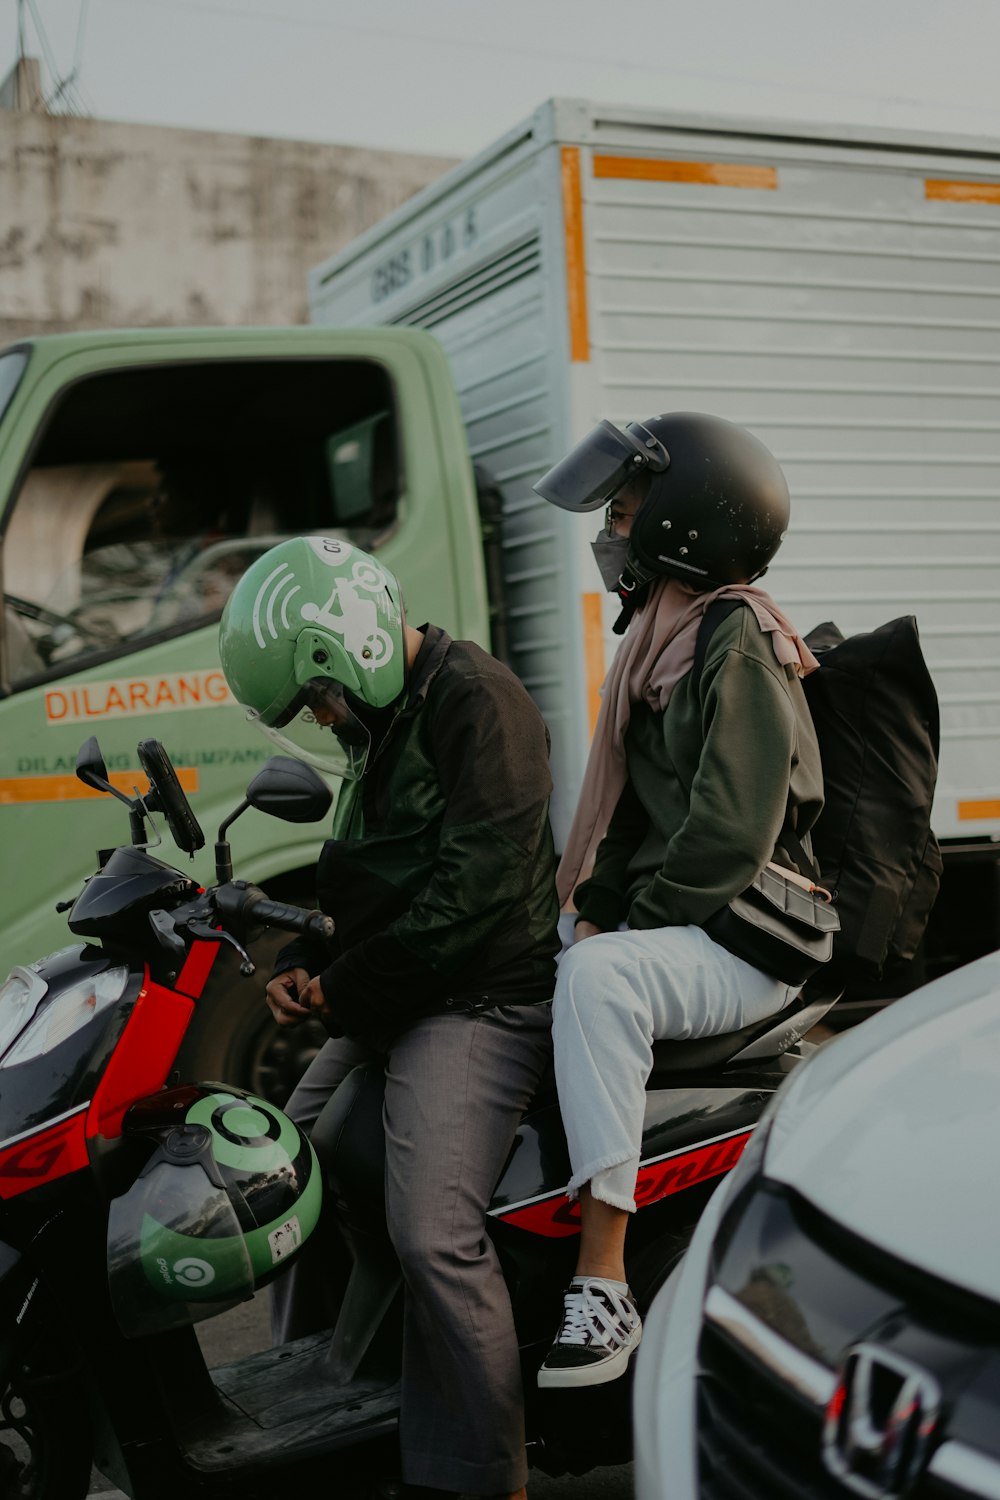 a couple of men on a motorcycle